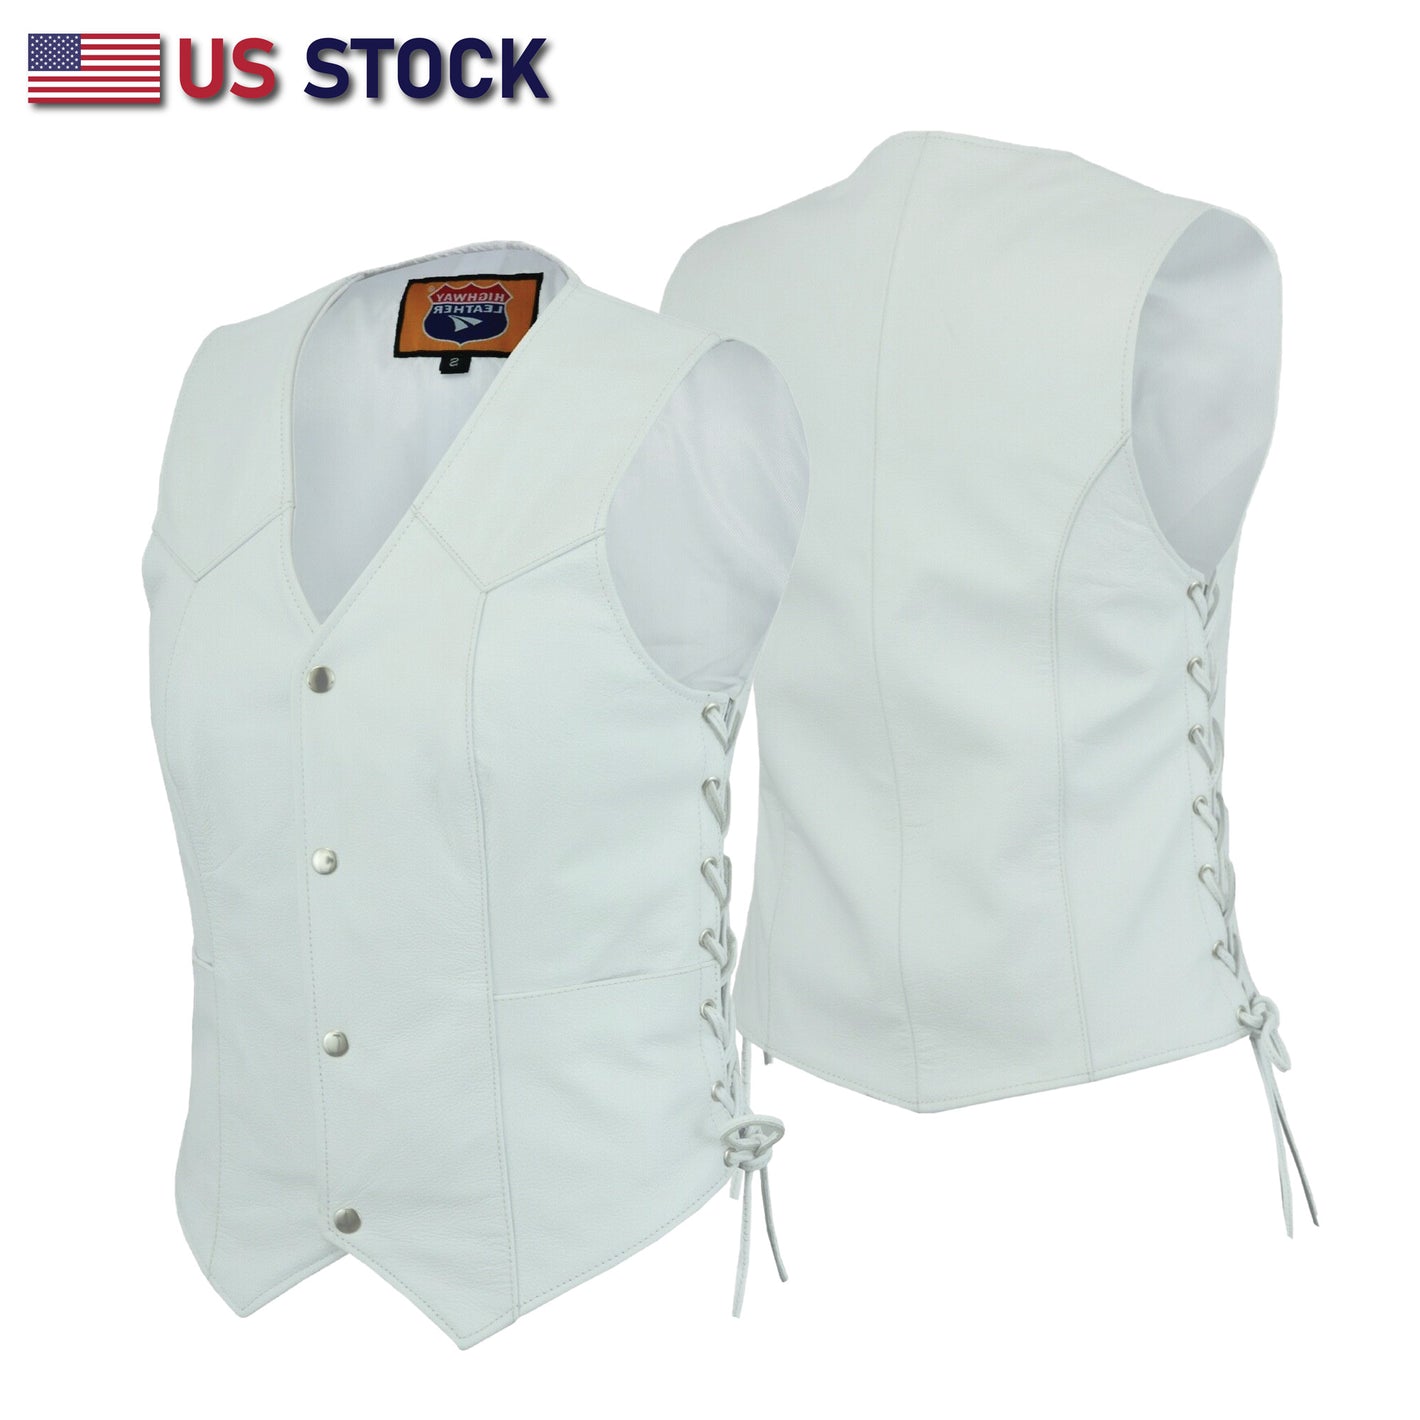 White Leather - Women motorcycle Vest Biker Club Concealed Carry SKU# 14501WHITE